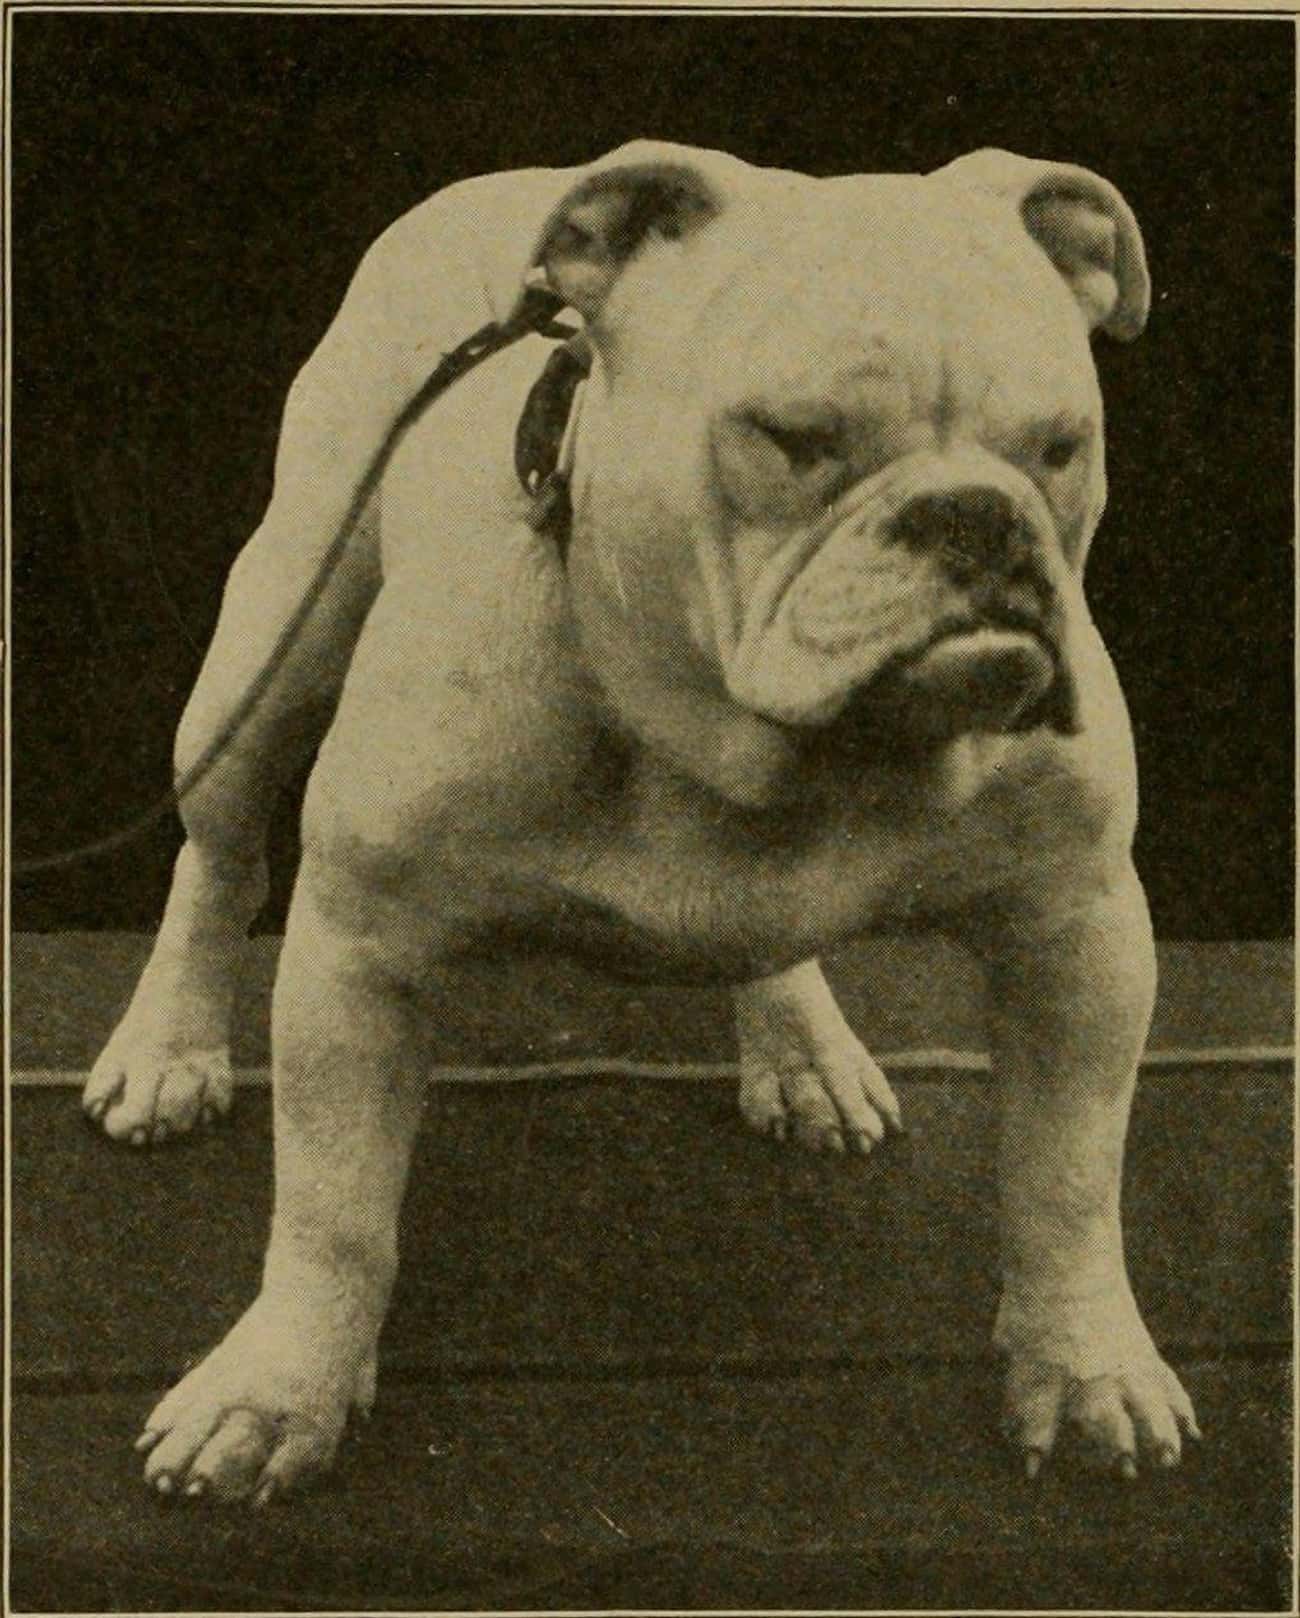 Breeders Needed Small Dogs With Strong Backs To Participate In The Sport – And The Bulldog Earned His Name